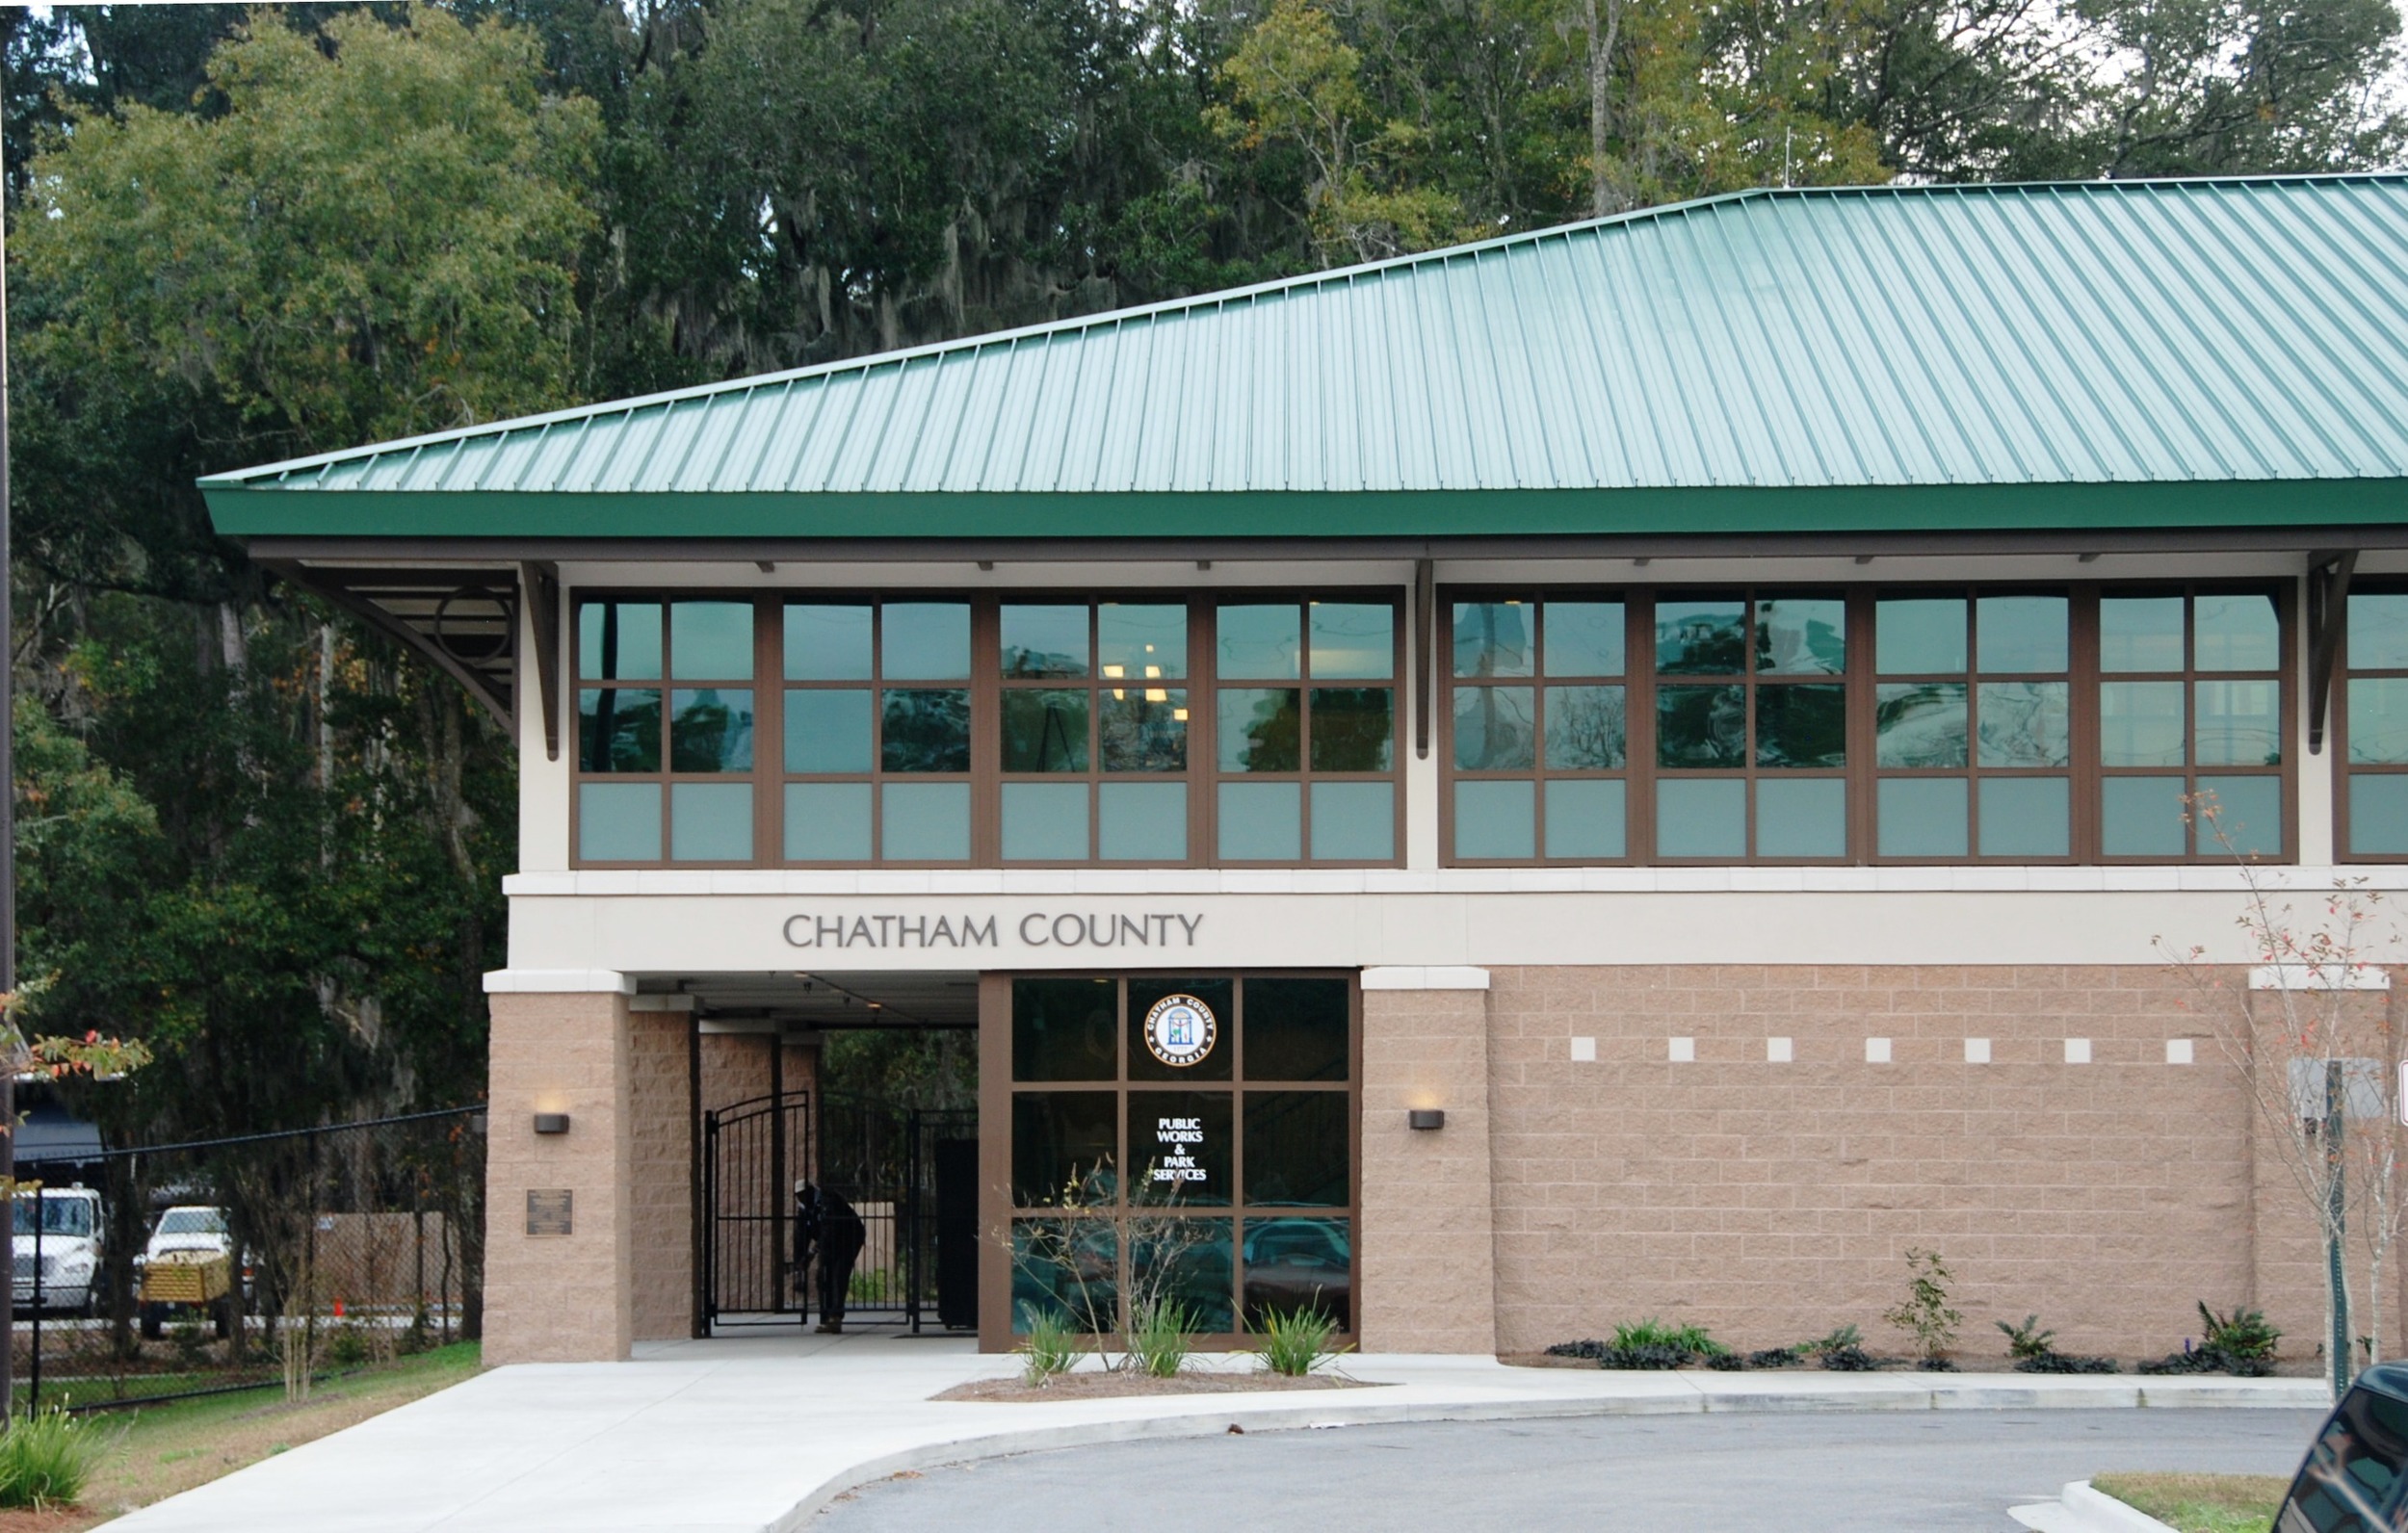 Chatham County Public Works